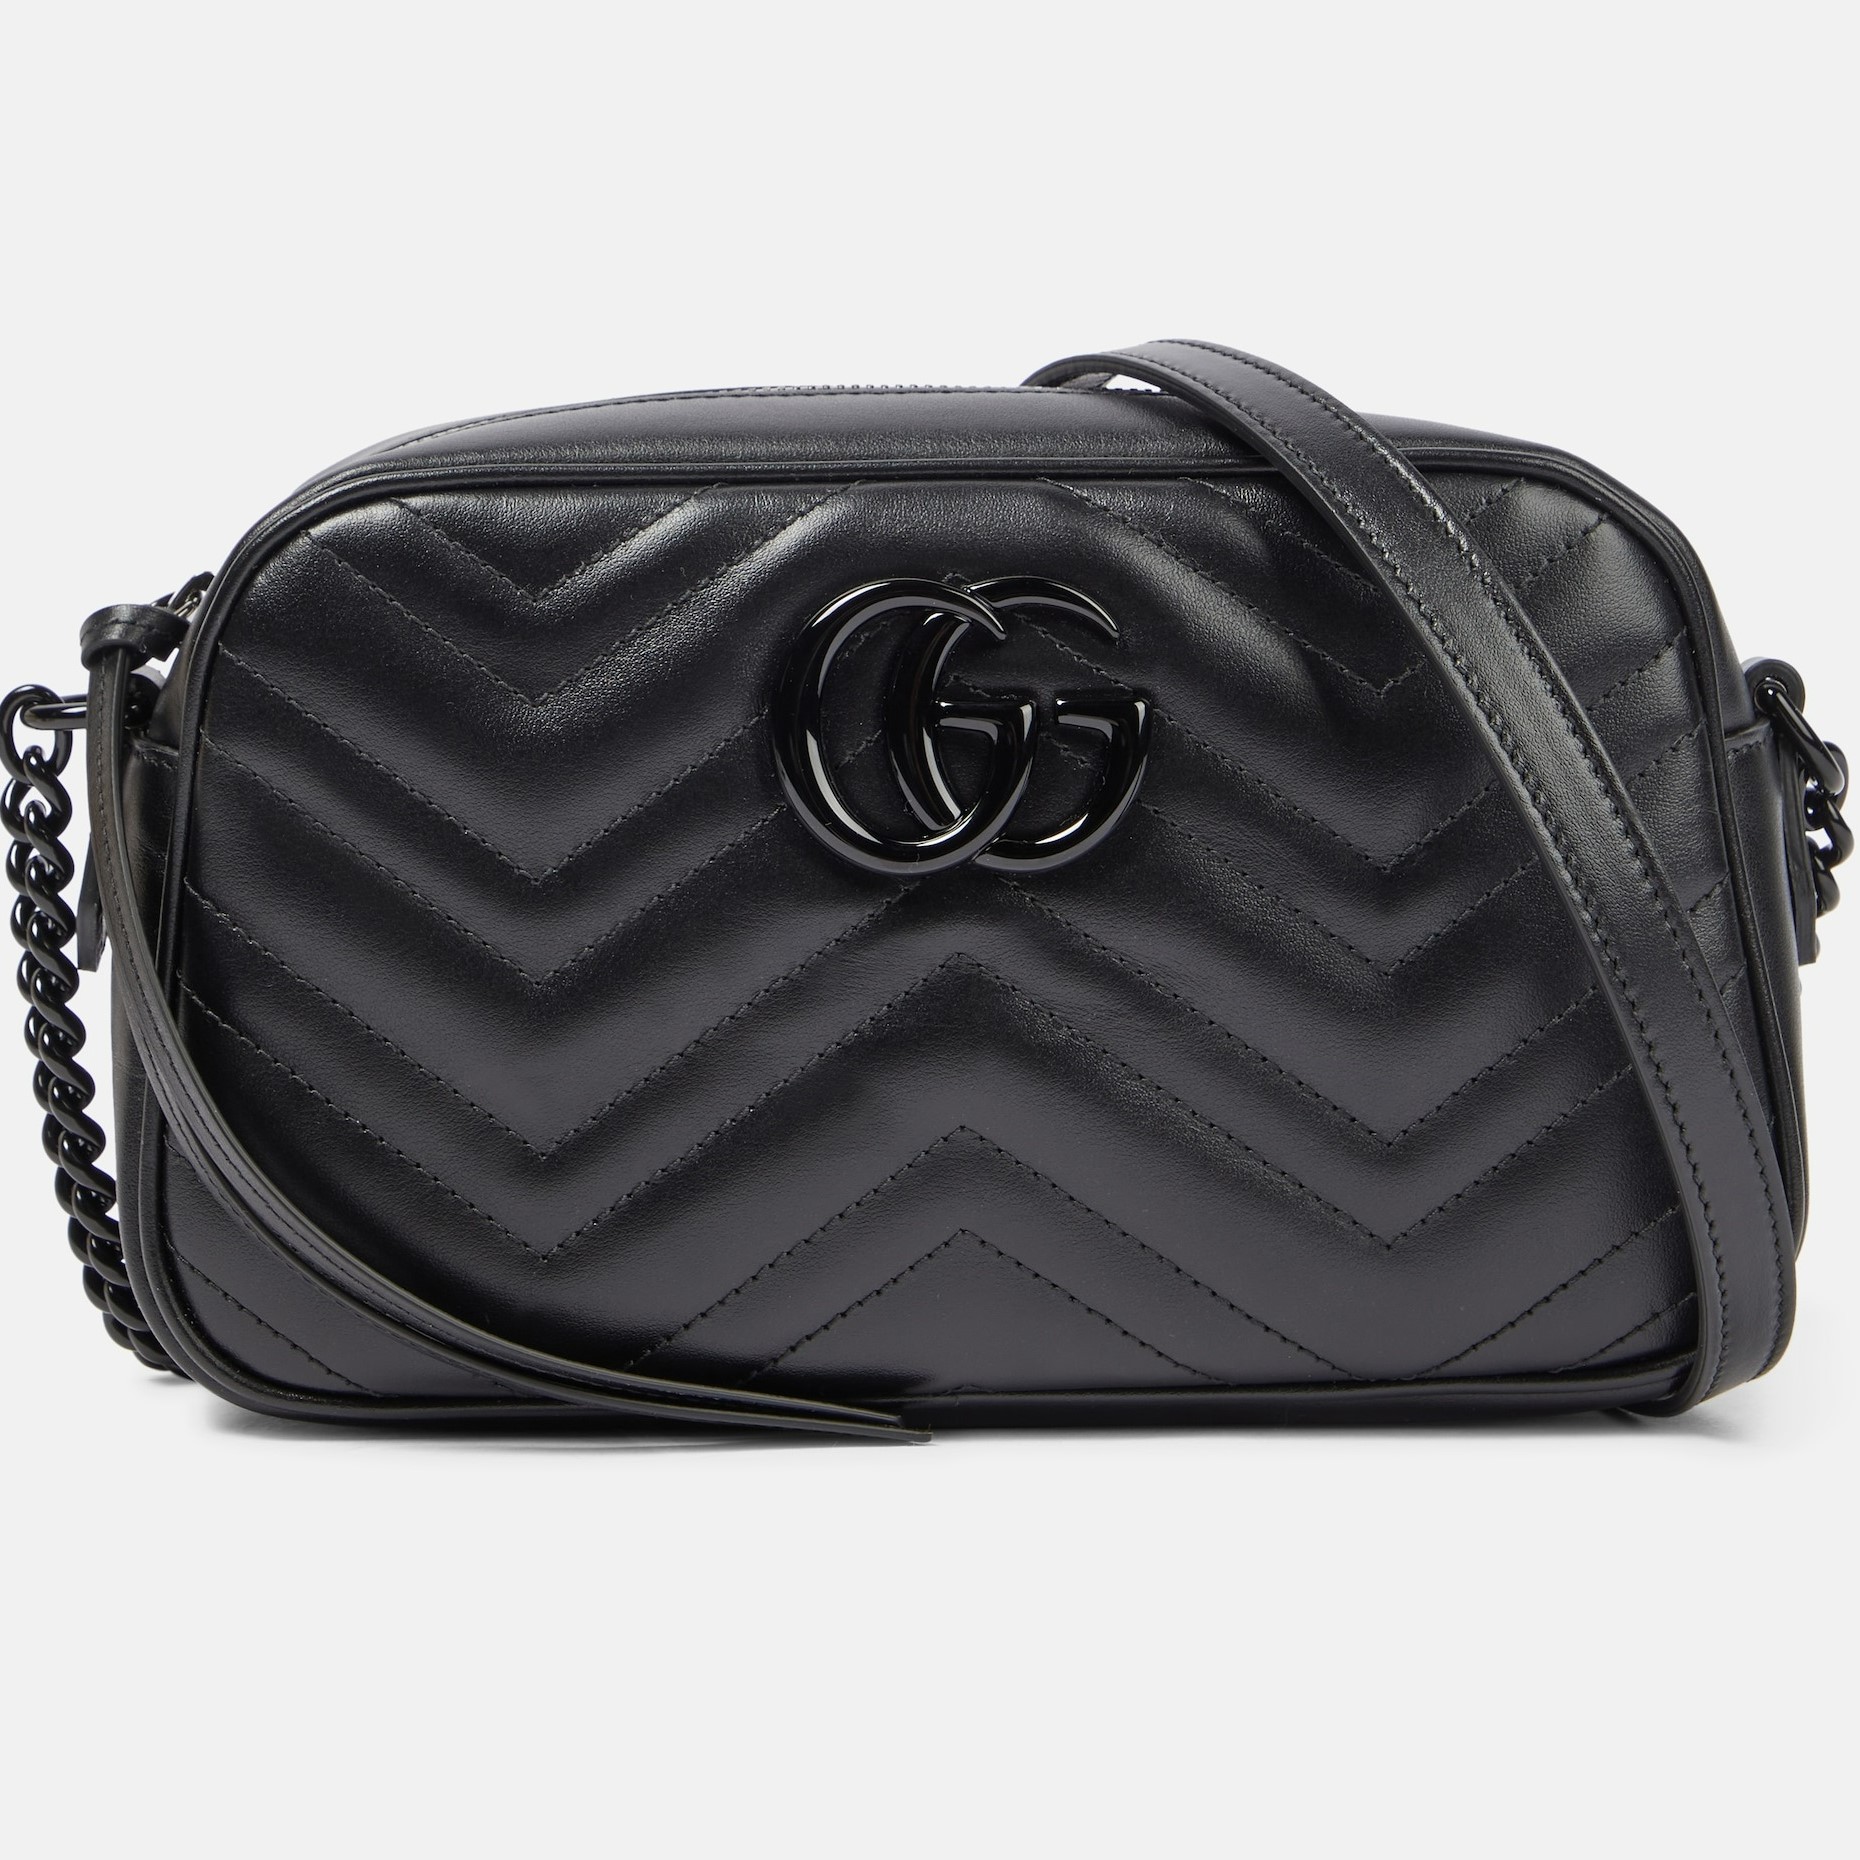 TÚI XÁCH NỮ GUCCI GG MARMONT MATELASSÉ CAMERA SMALL QUILTED LEATHER SHOULDER BAG 5